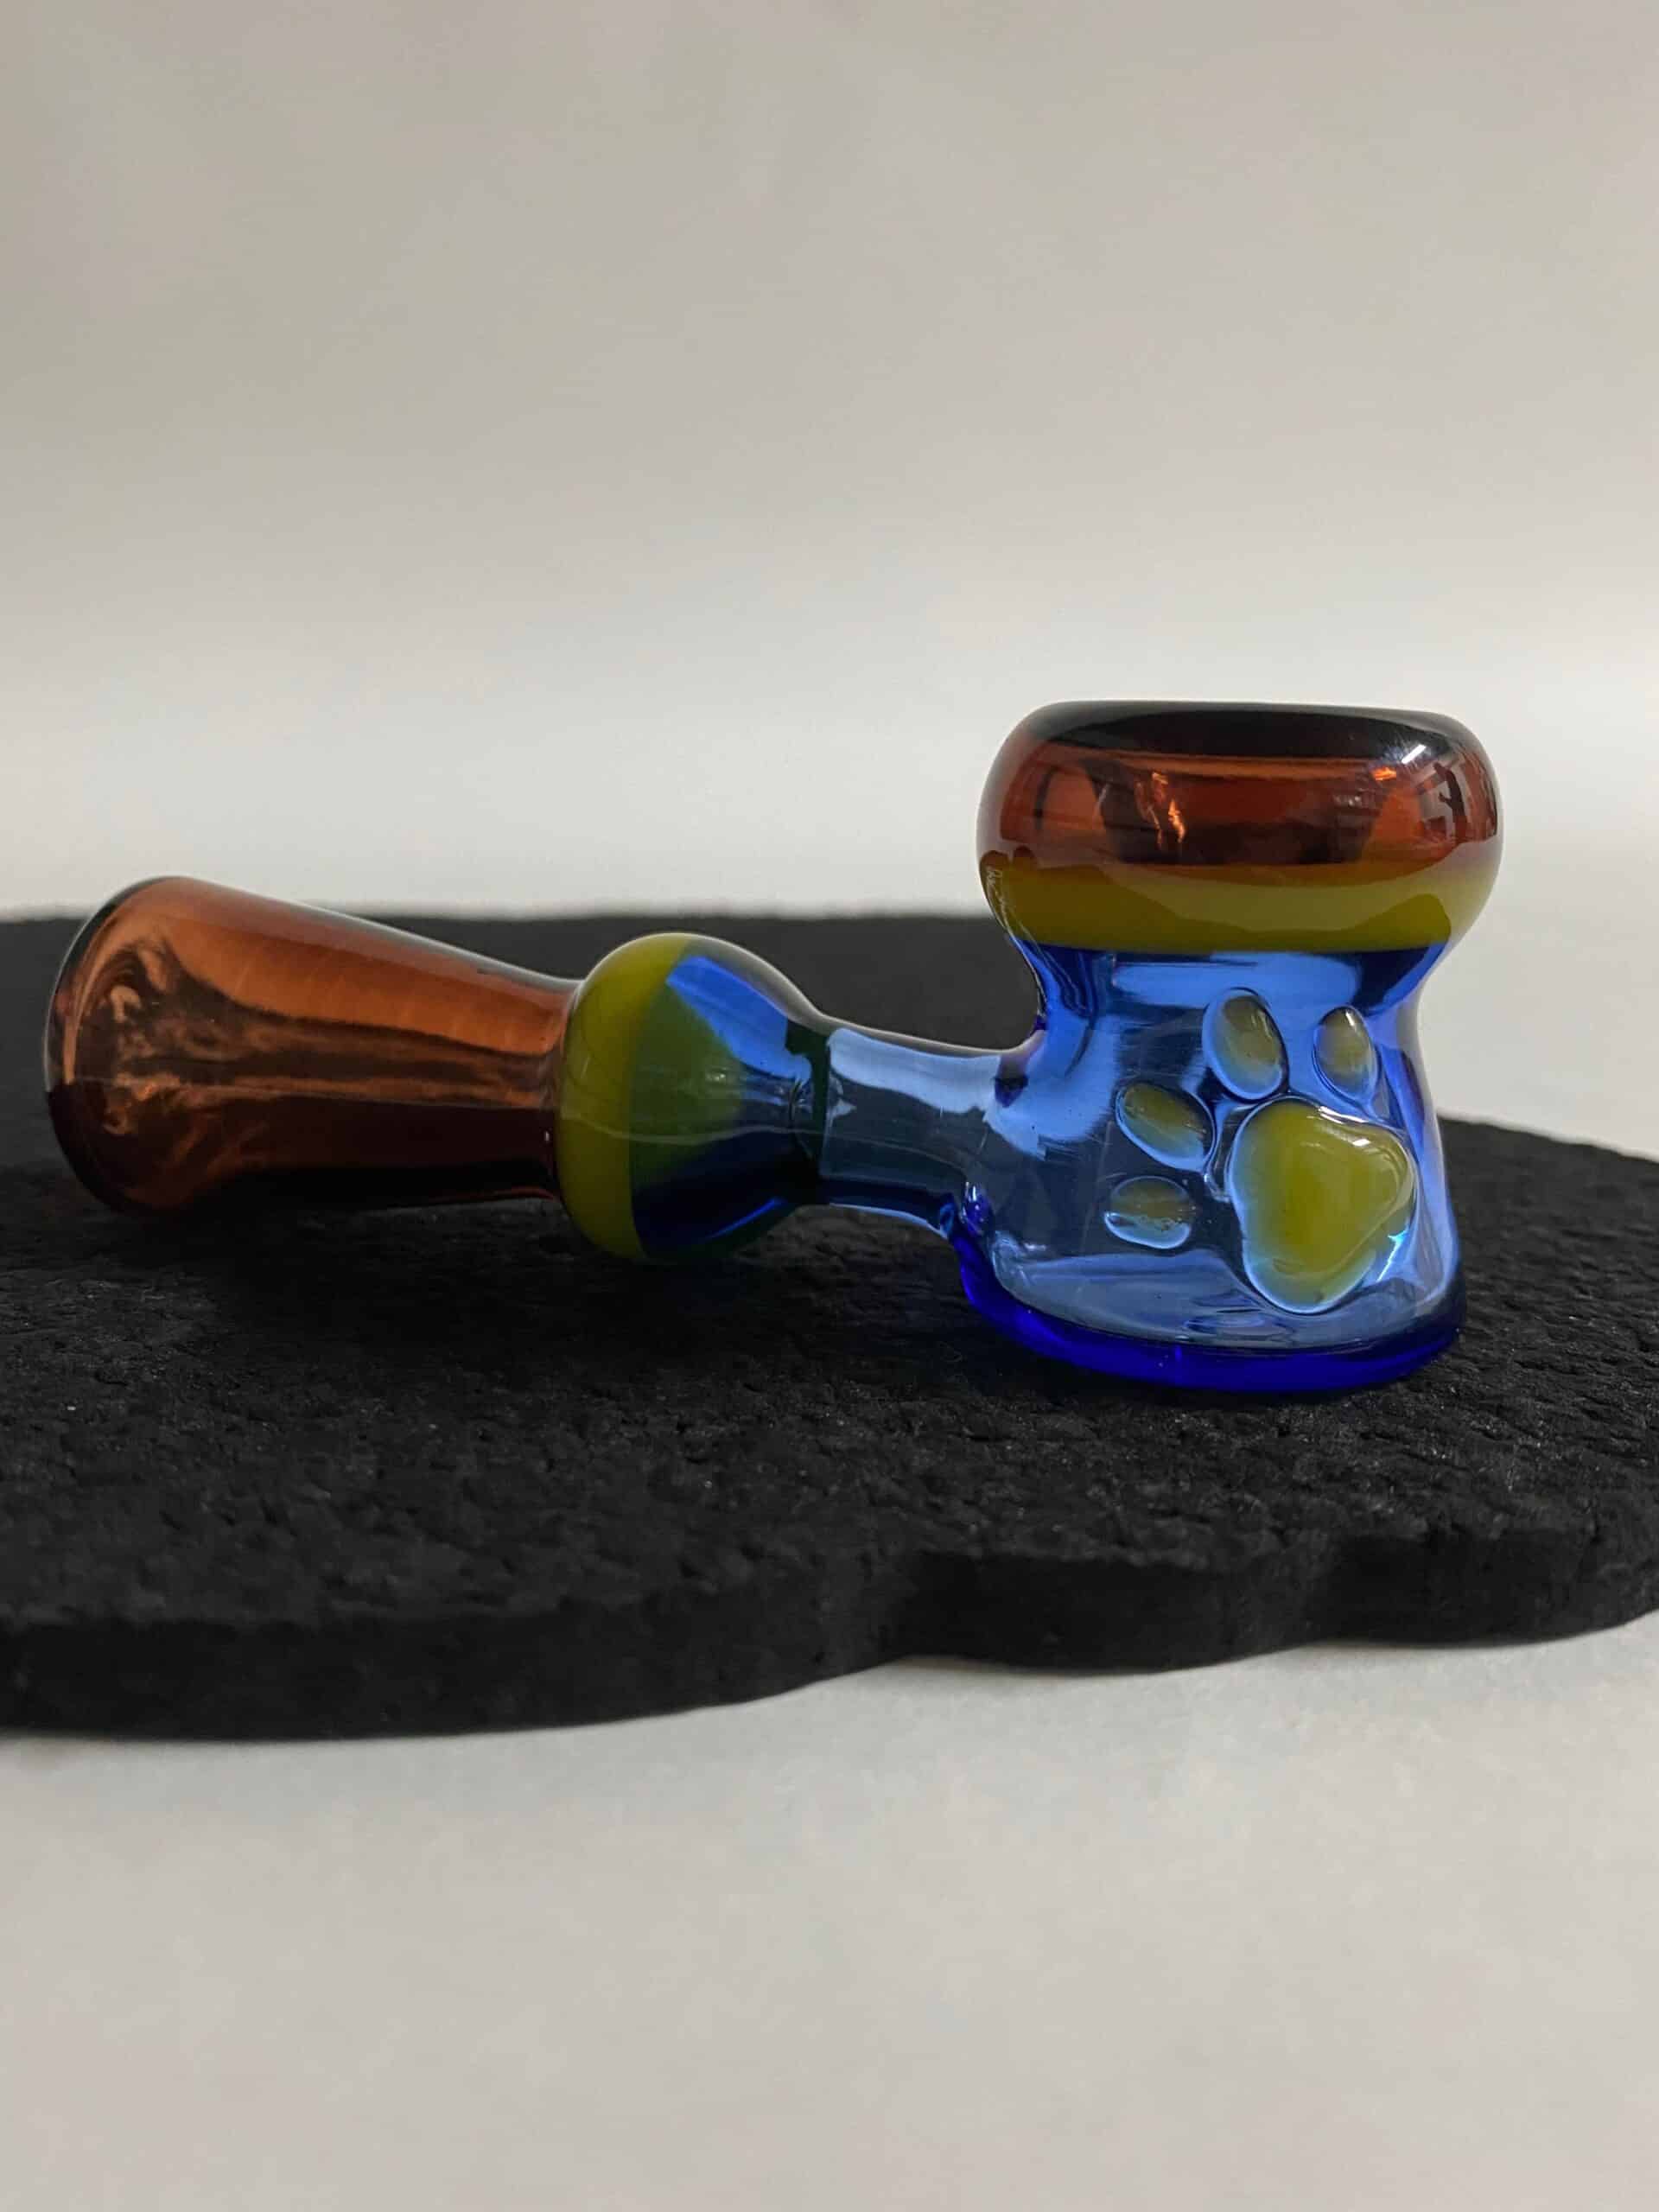 artisan-crafted design of the Paw Print Hand Pipe by Swanny